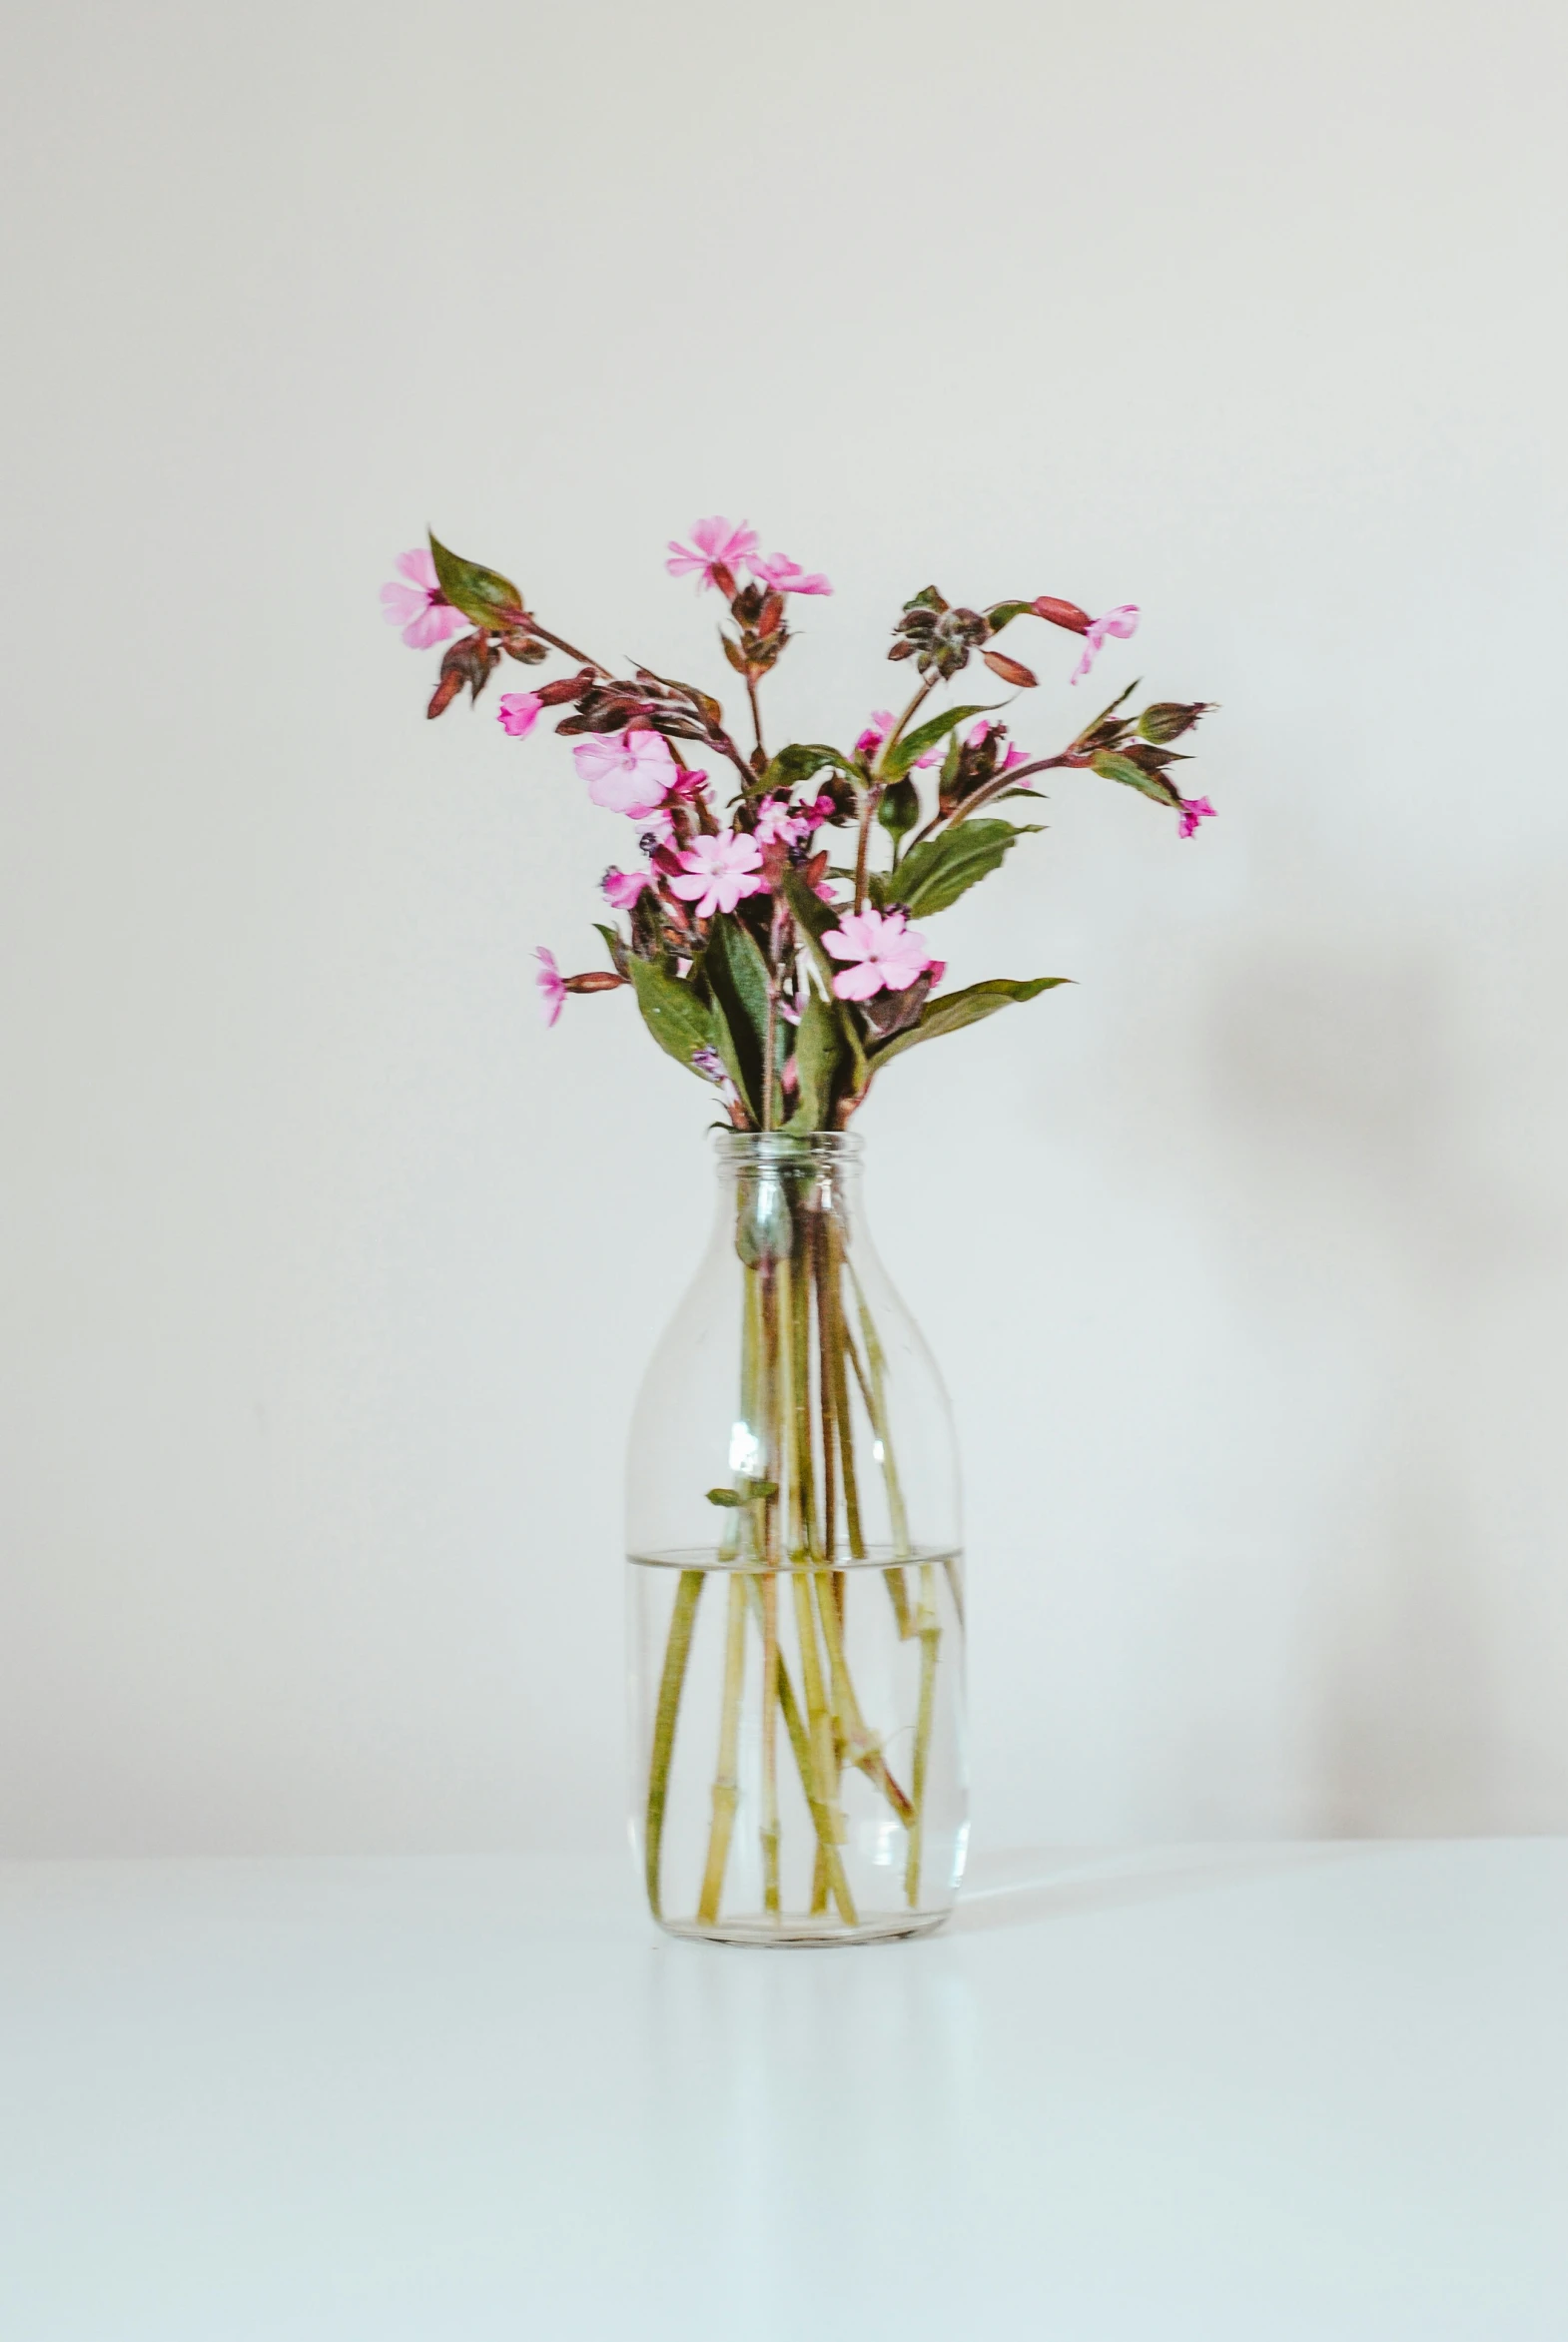 pink flowers sit in a clear glass vase